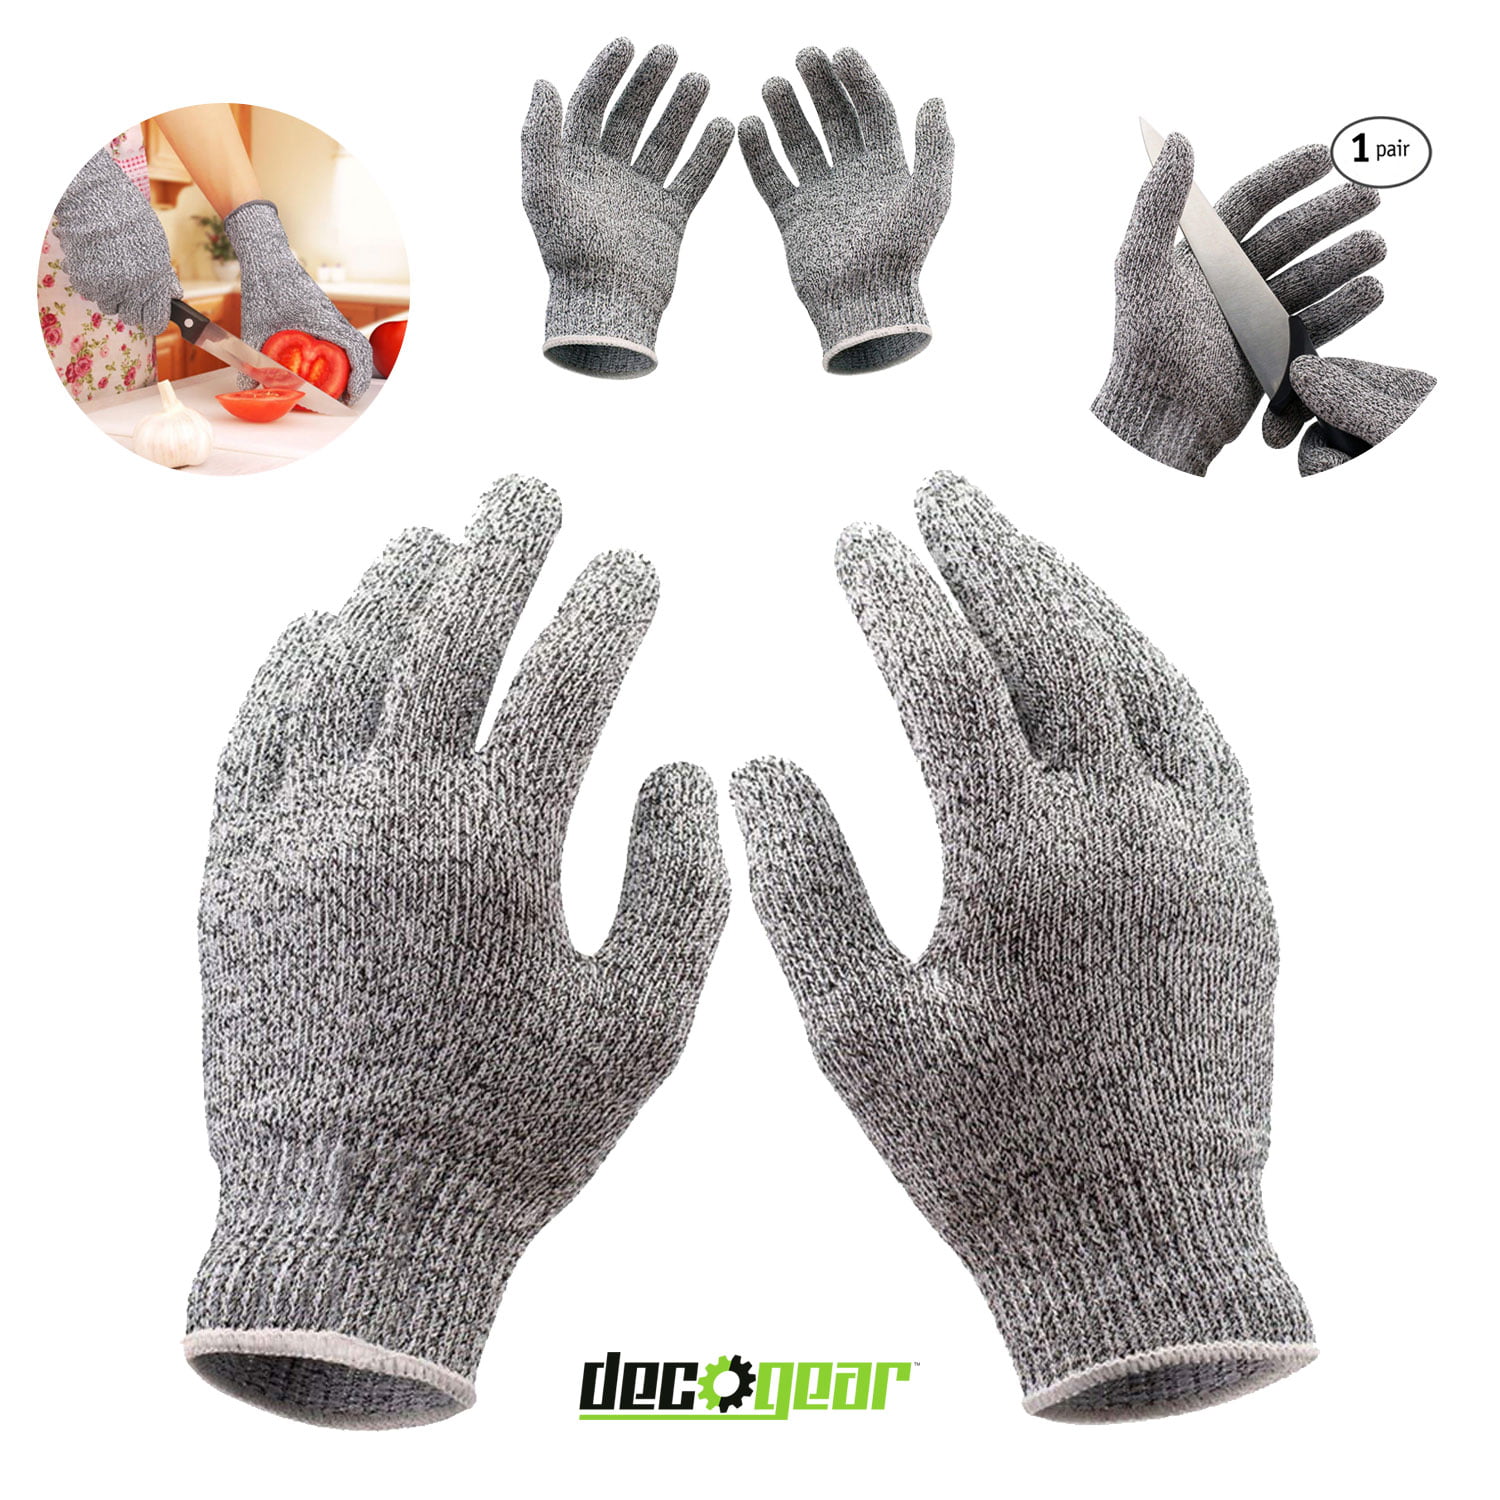 Details about   1 pair Anti-cut Level 5 Work Safety Gloves for Cut Metal Glass Handling Work 